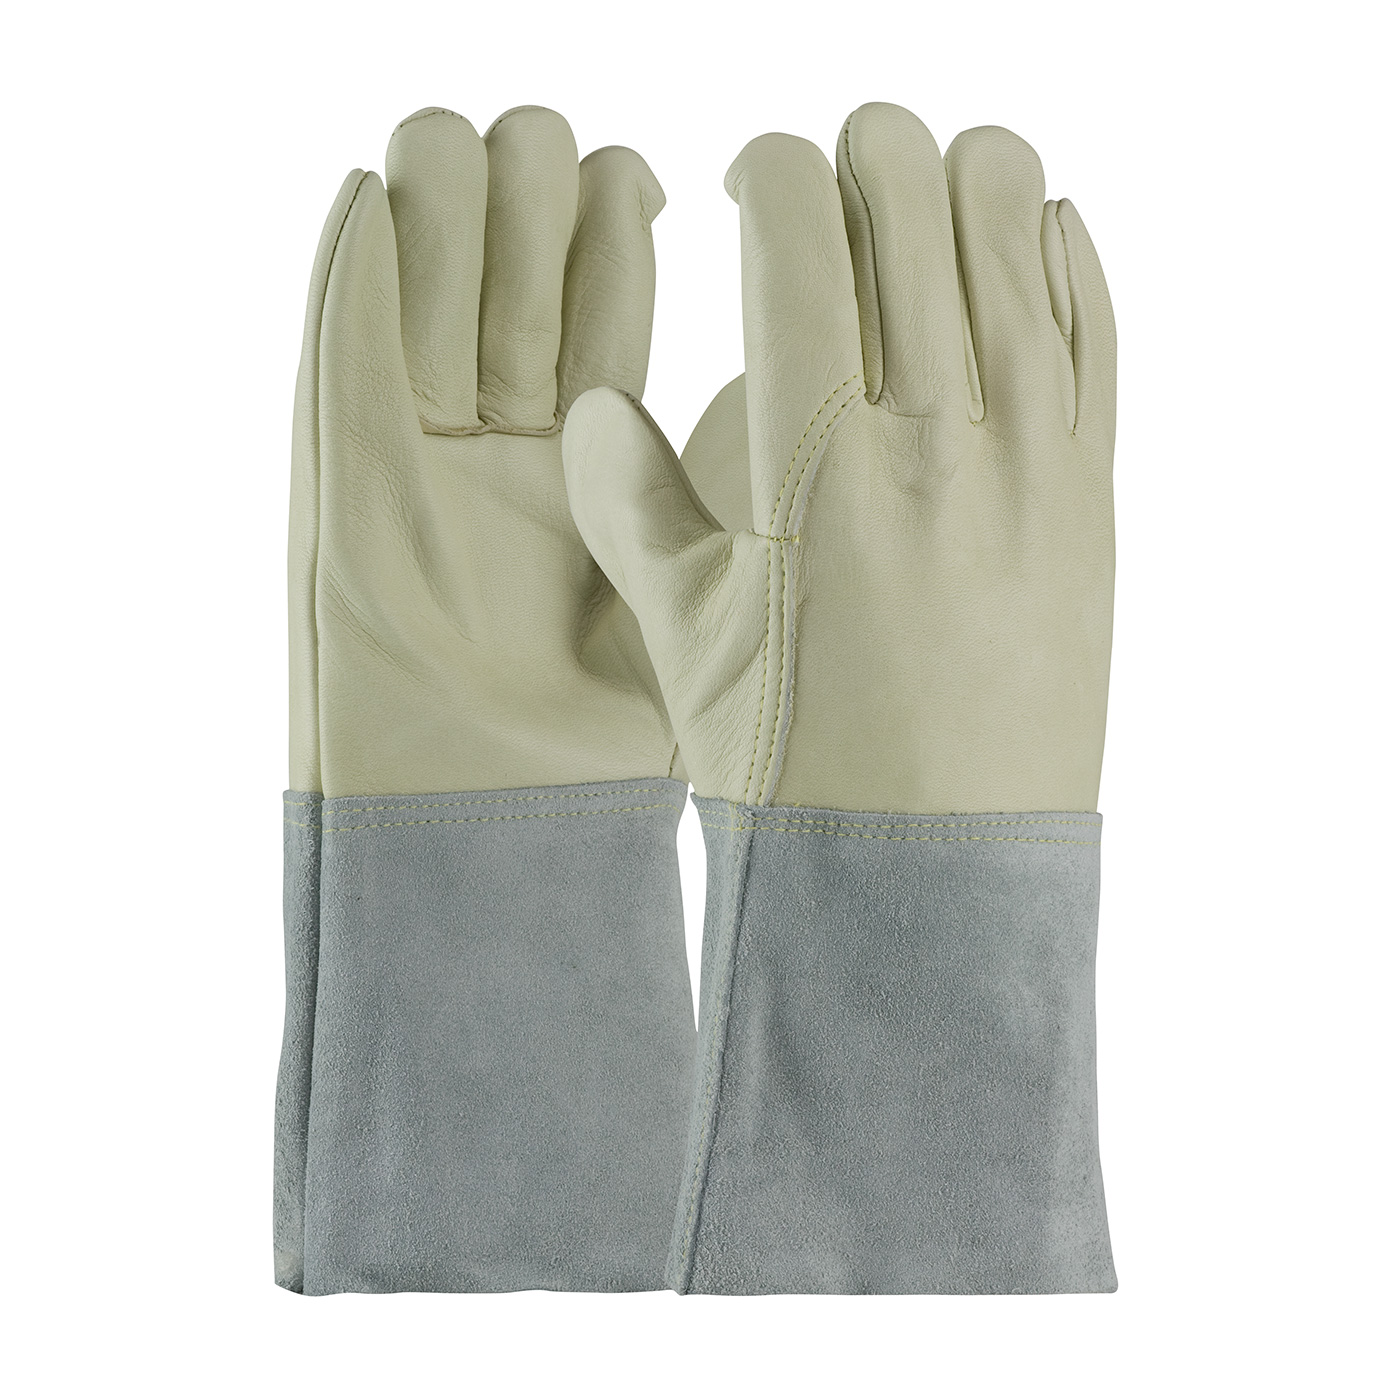 #75-2022 PIP® Top Grain  Cowhide Leather Mig Tig Welder's Gloves with Leather Band Top and Kevlar® Stitching